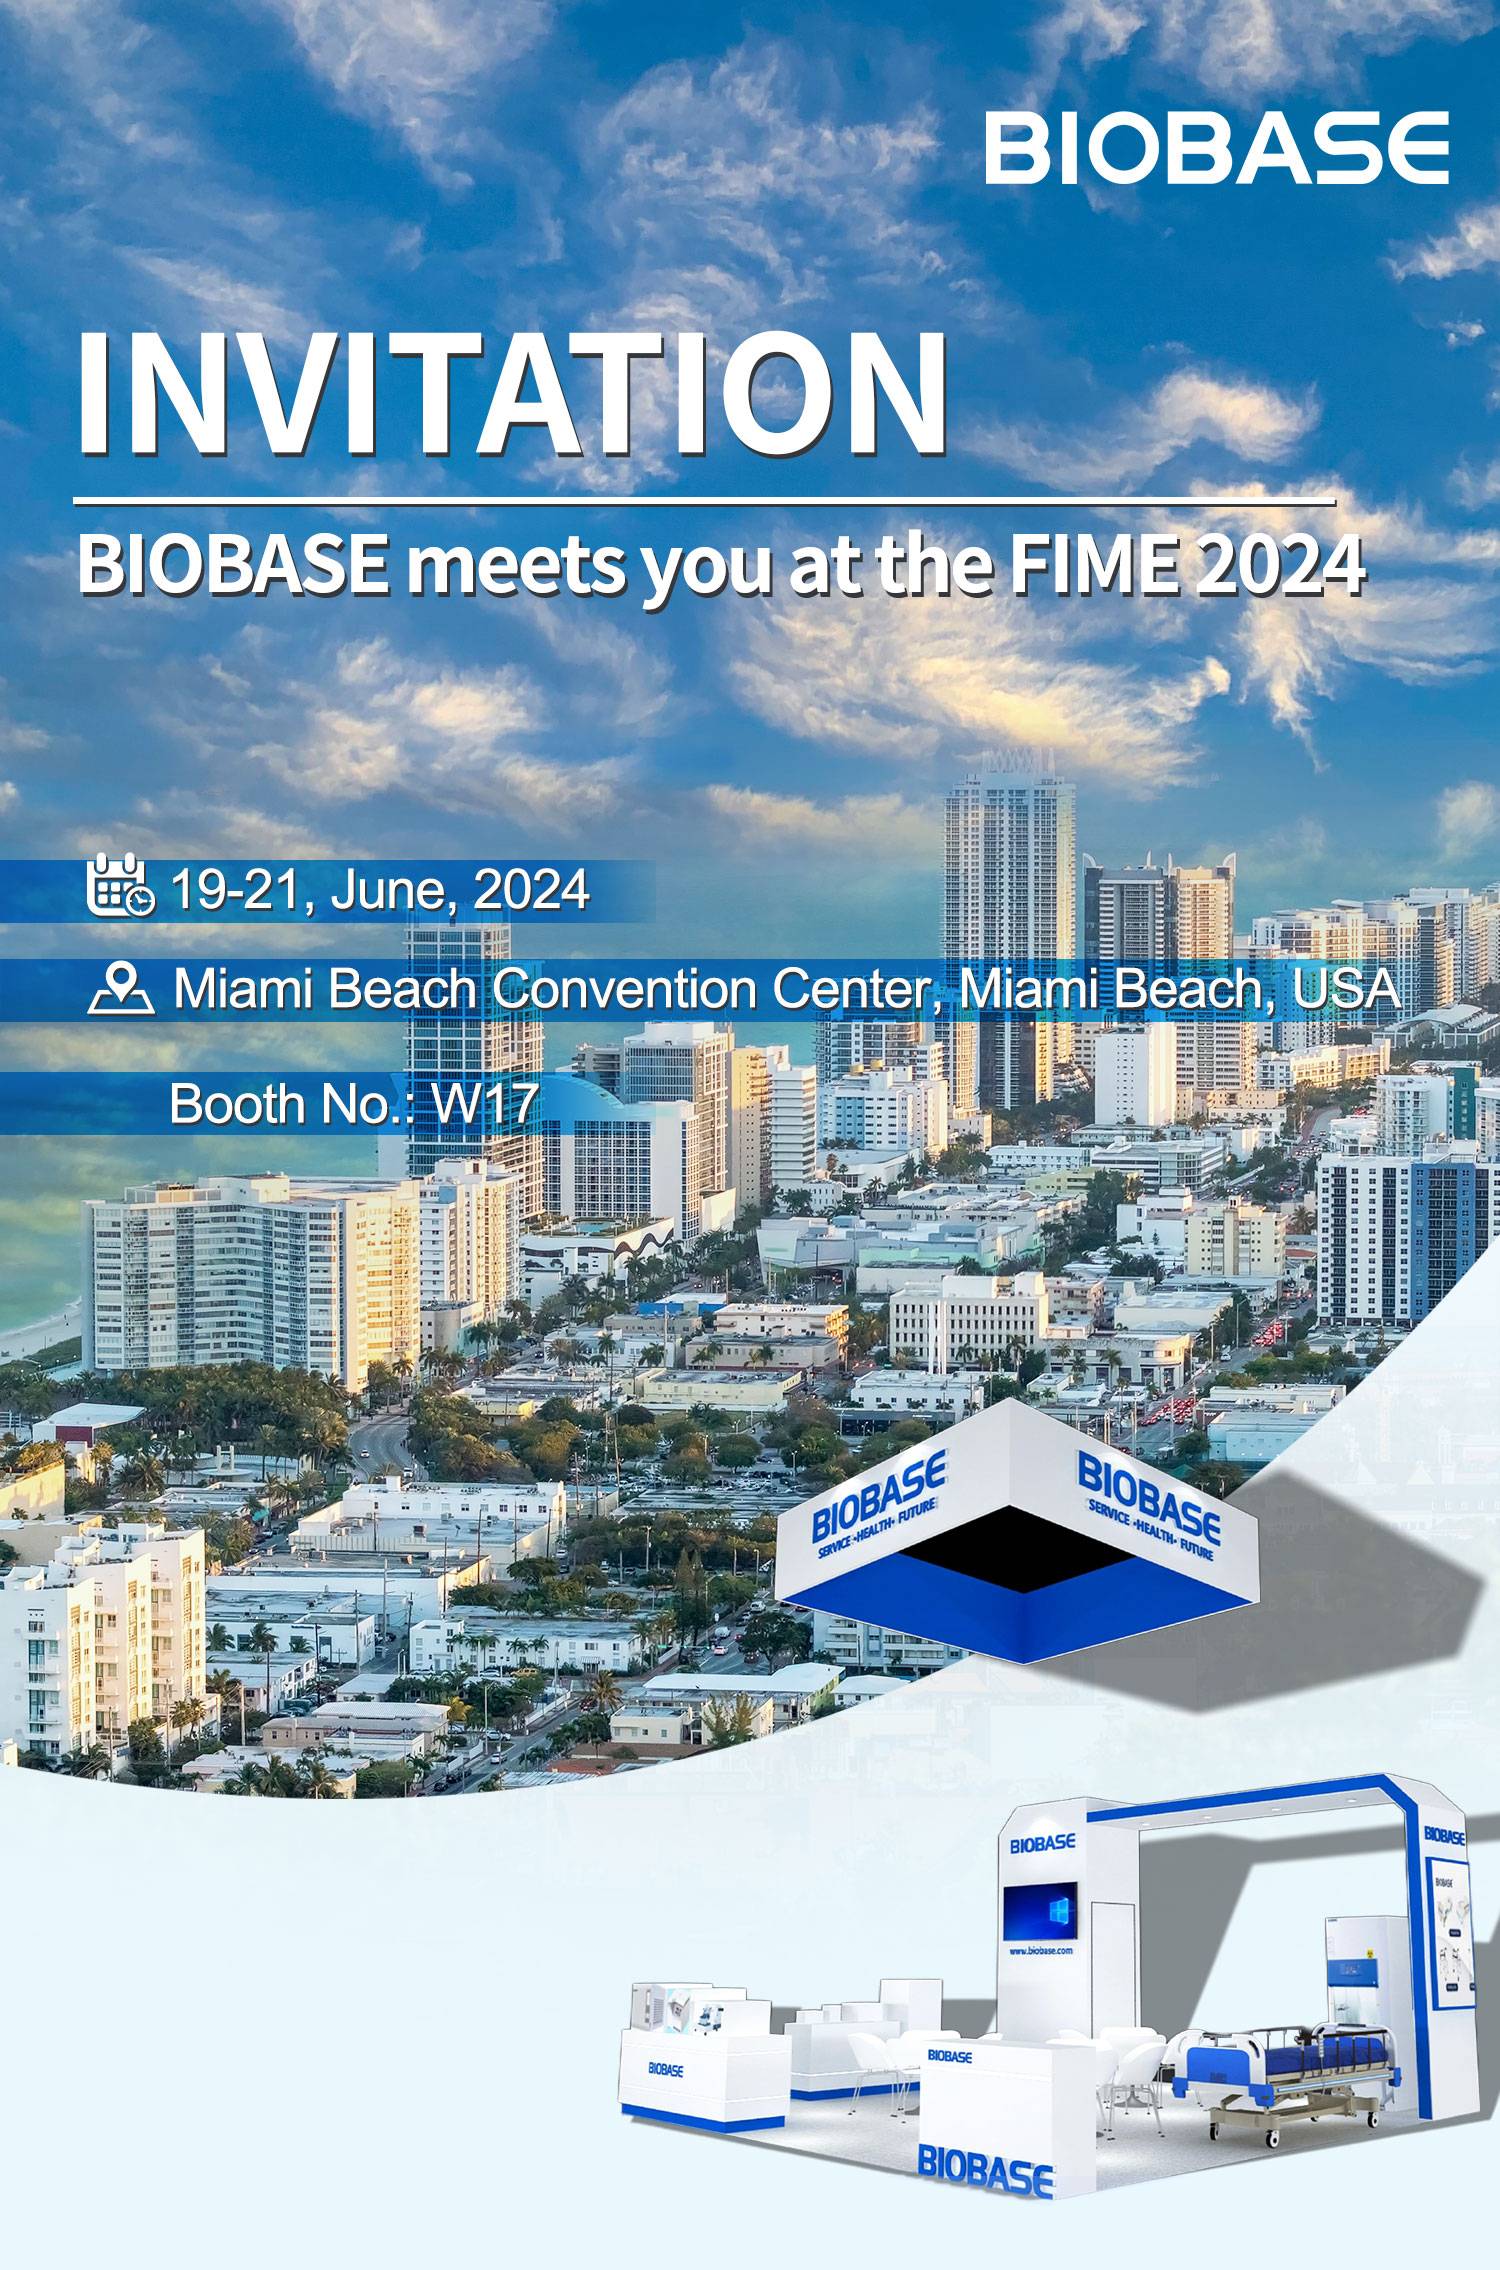 Invitation|BIOBASE meets you at the FIME 2024